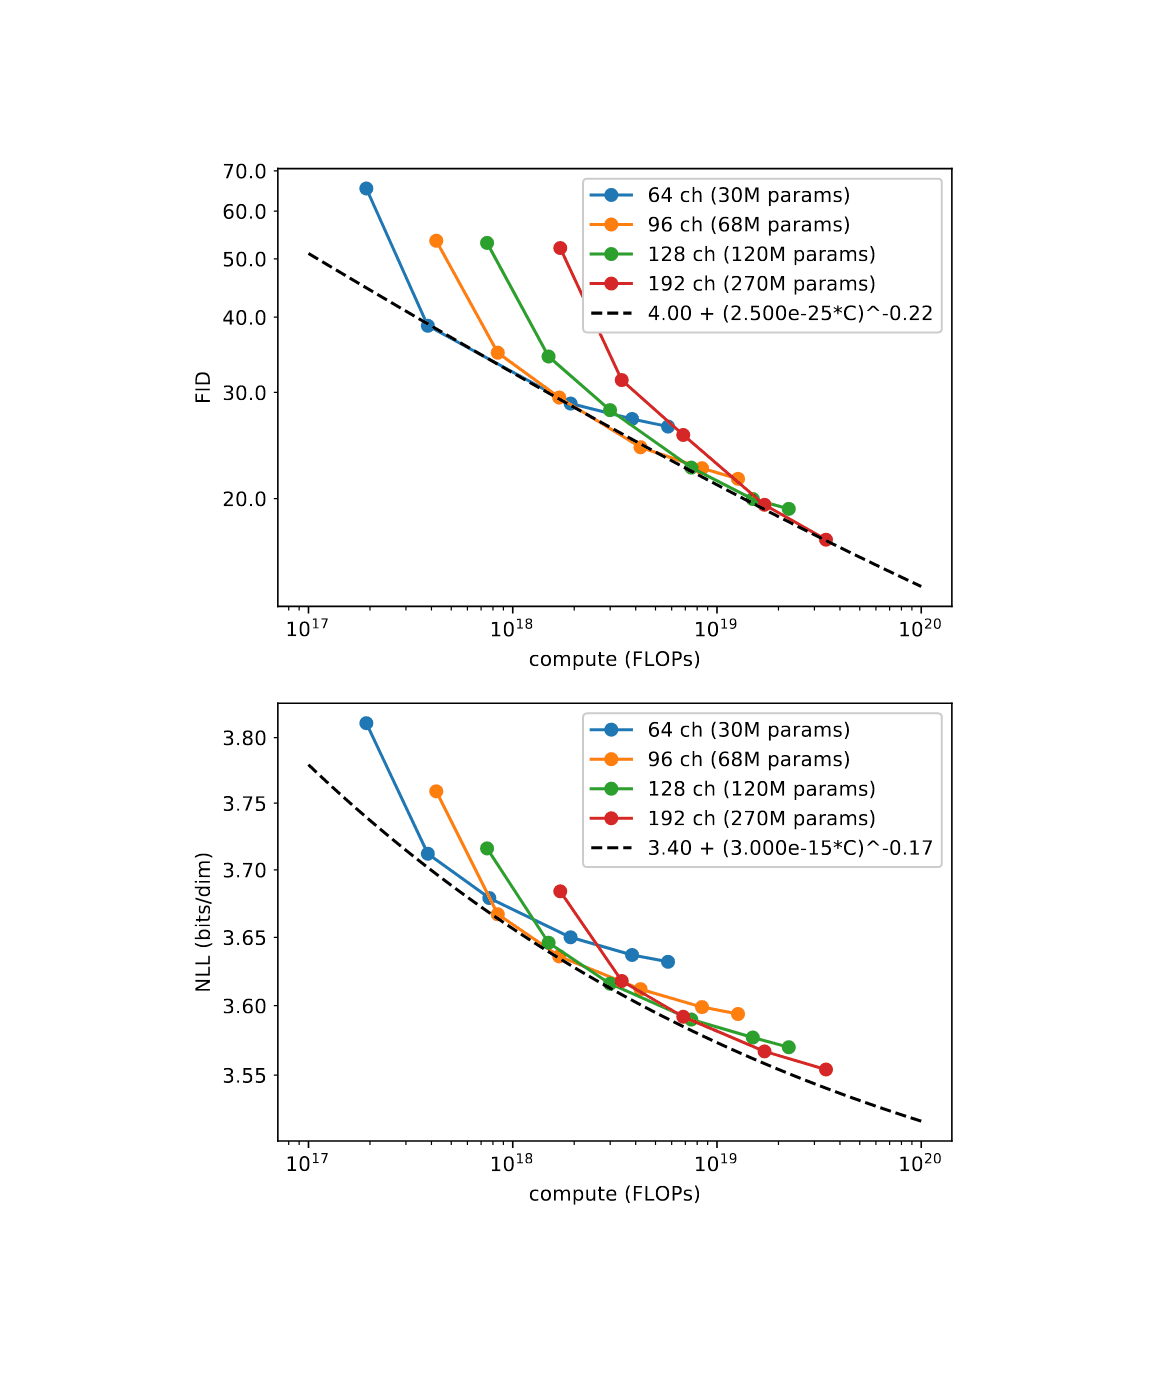 Figure 10: FID and validation NLL [negative log likelihood] throughout training on ImageNet 64 × 64 for different model sizes. The constant for the FID trend line was approximated using the FID of in-distribution data. For the NLL trend line, the constant was approximated by rounding down the current state-of-the-art NLL (Roy et al 2020) on this dataset.